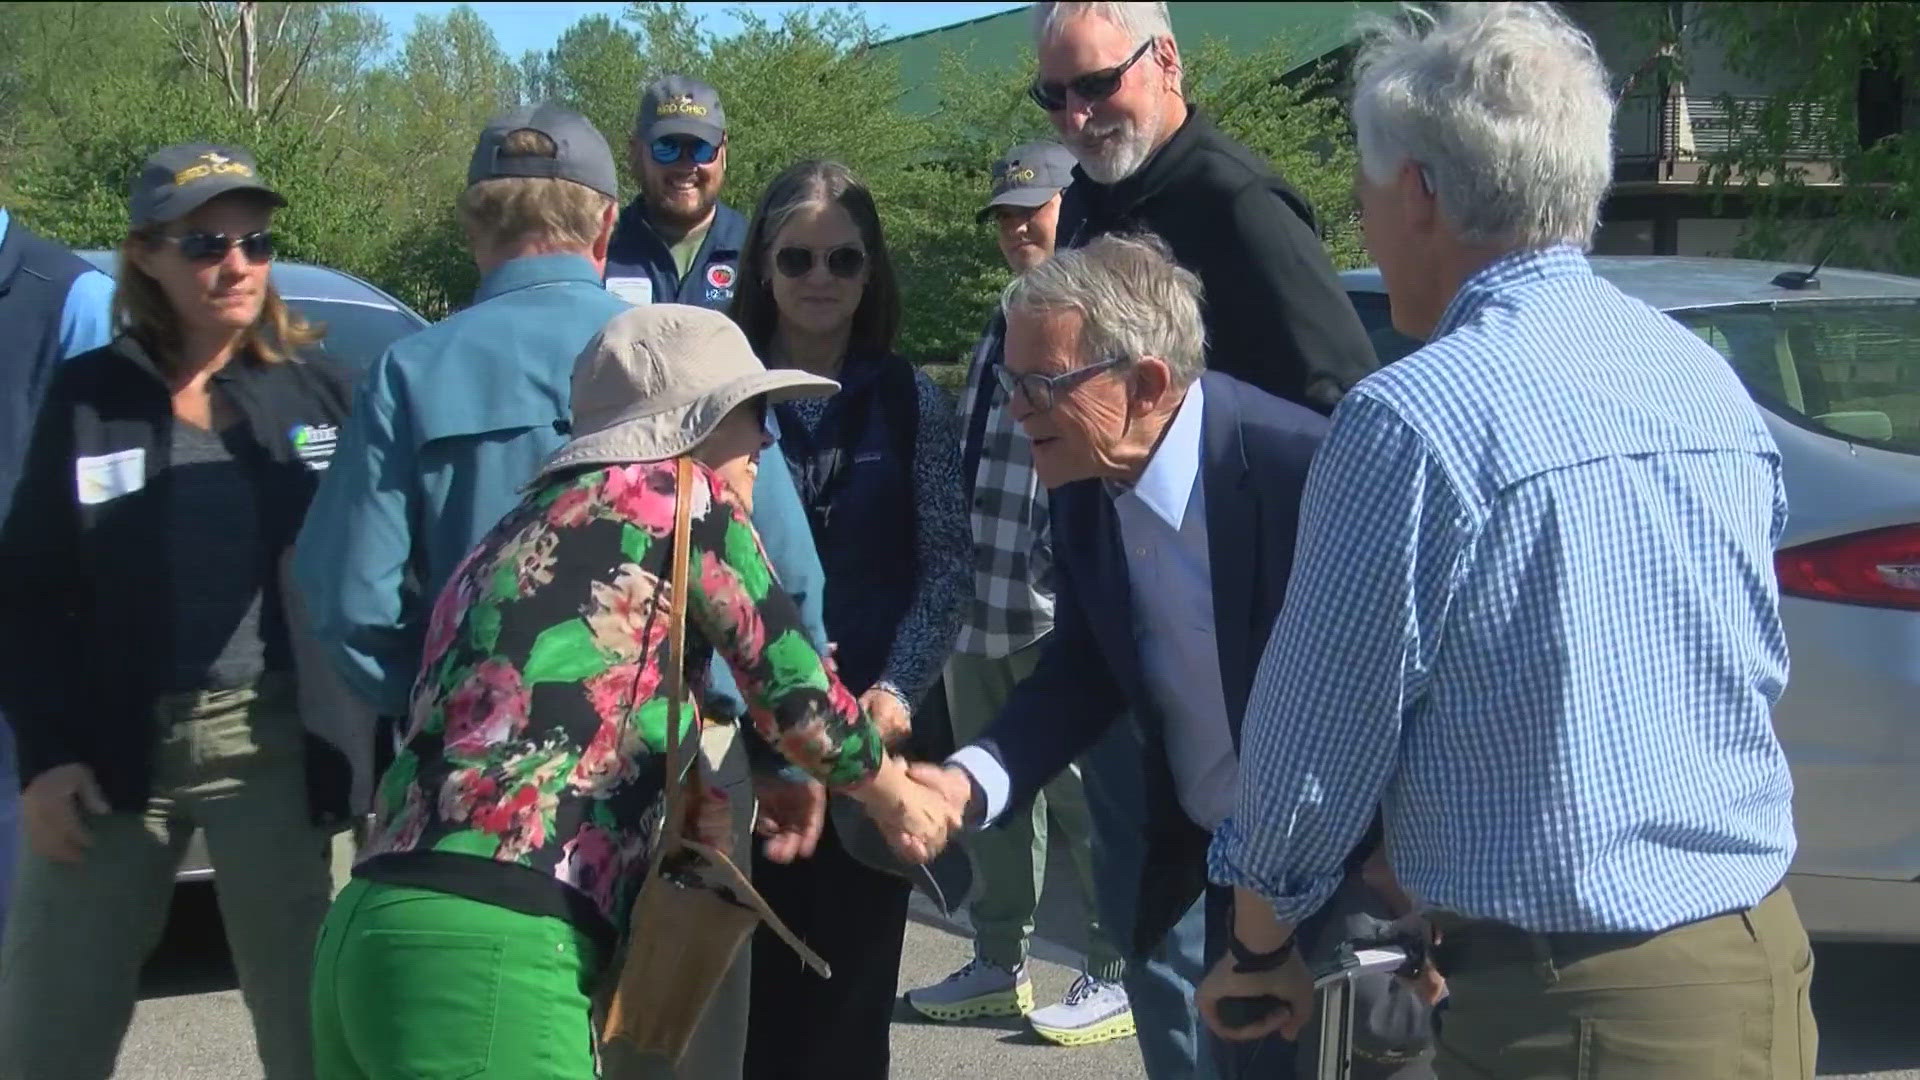 DeWine touted changes the state has made over the past few years, such as adding and restoring wetlands in the Maumee Basin and all over the state.